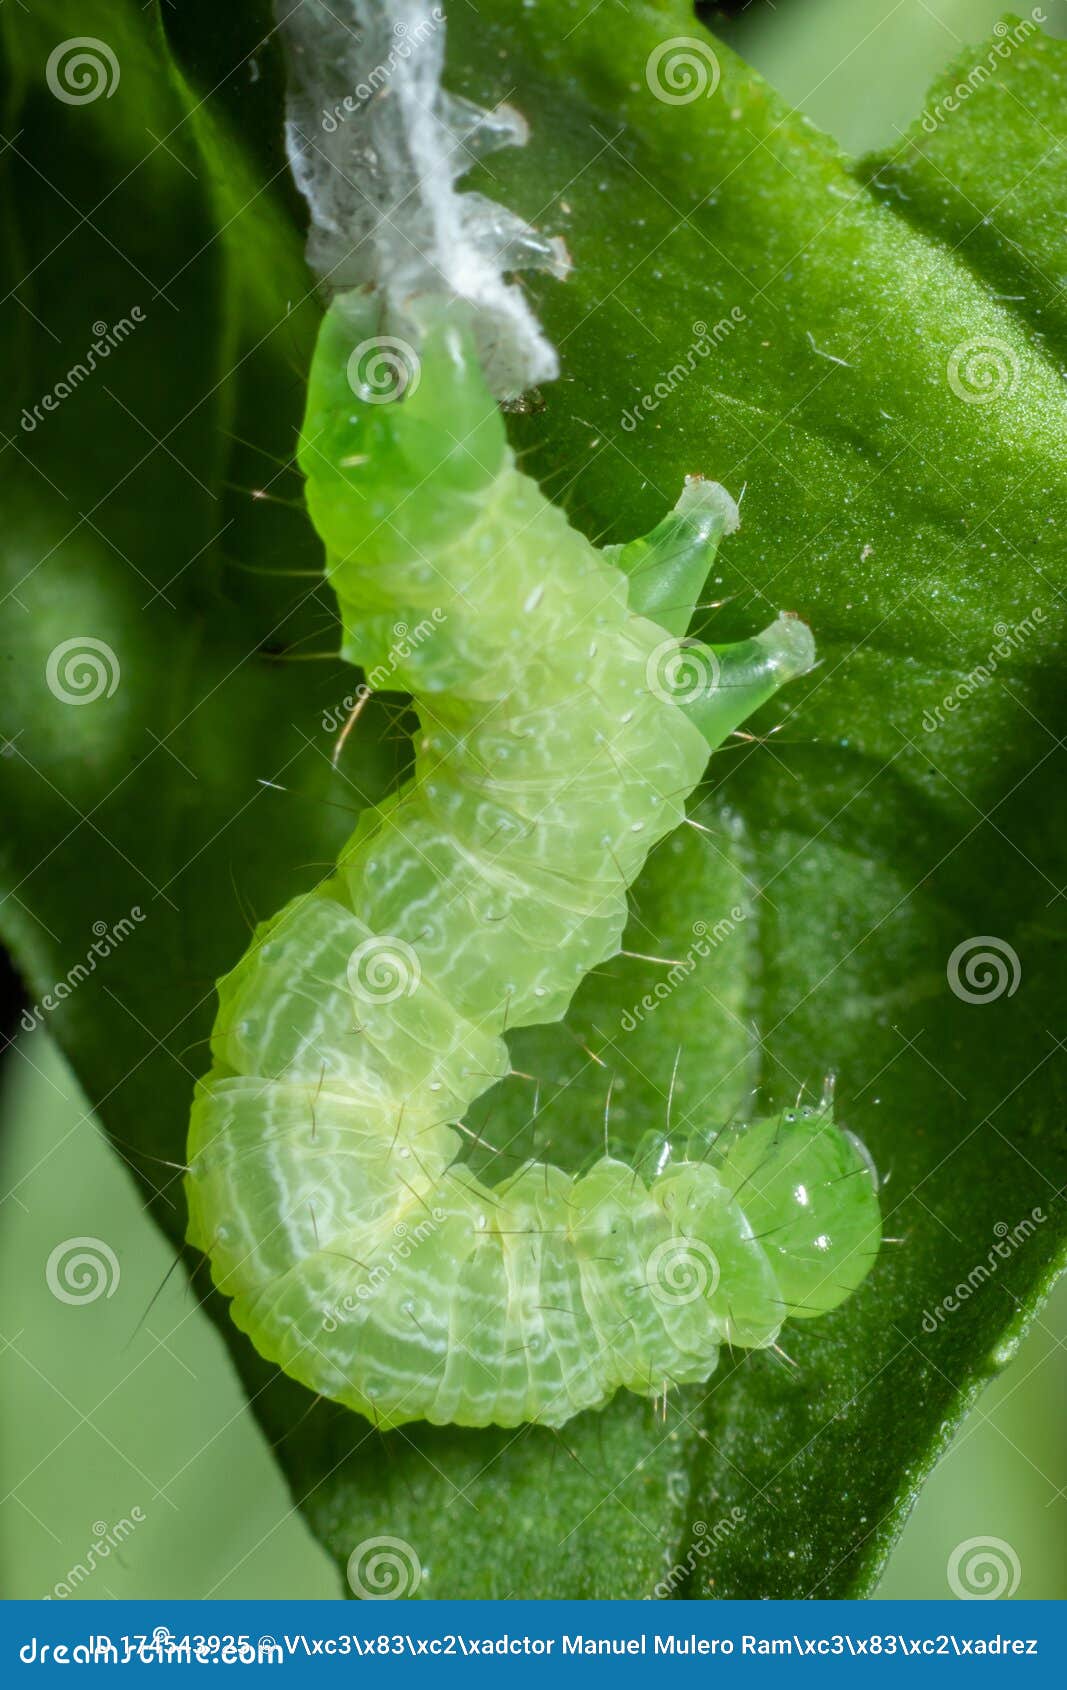 Green Caterpillar Molting the Skin on Basil Leaf Stock Image - Image of  animal, insect: 174543925